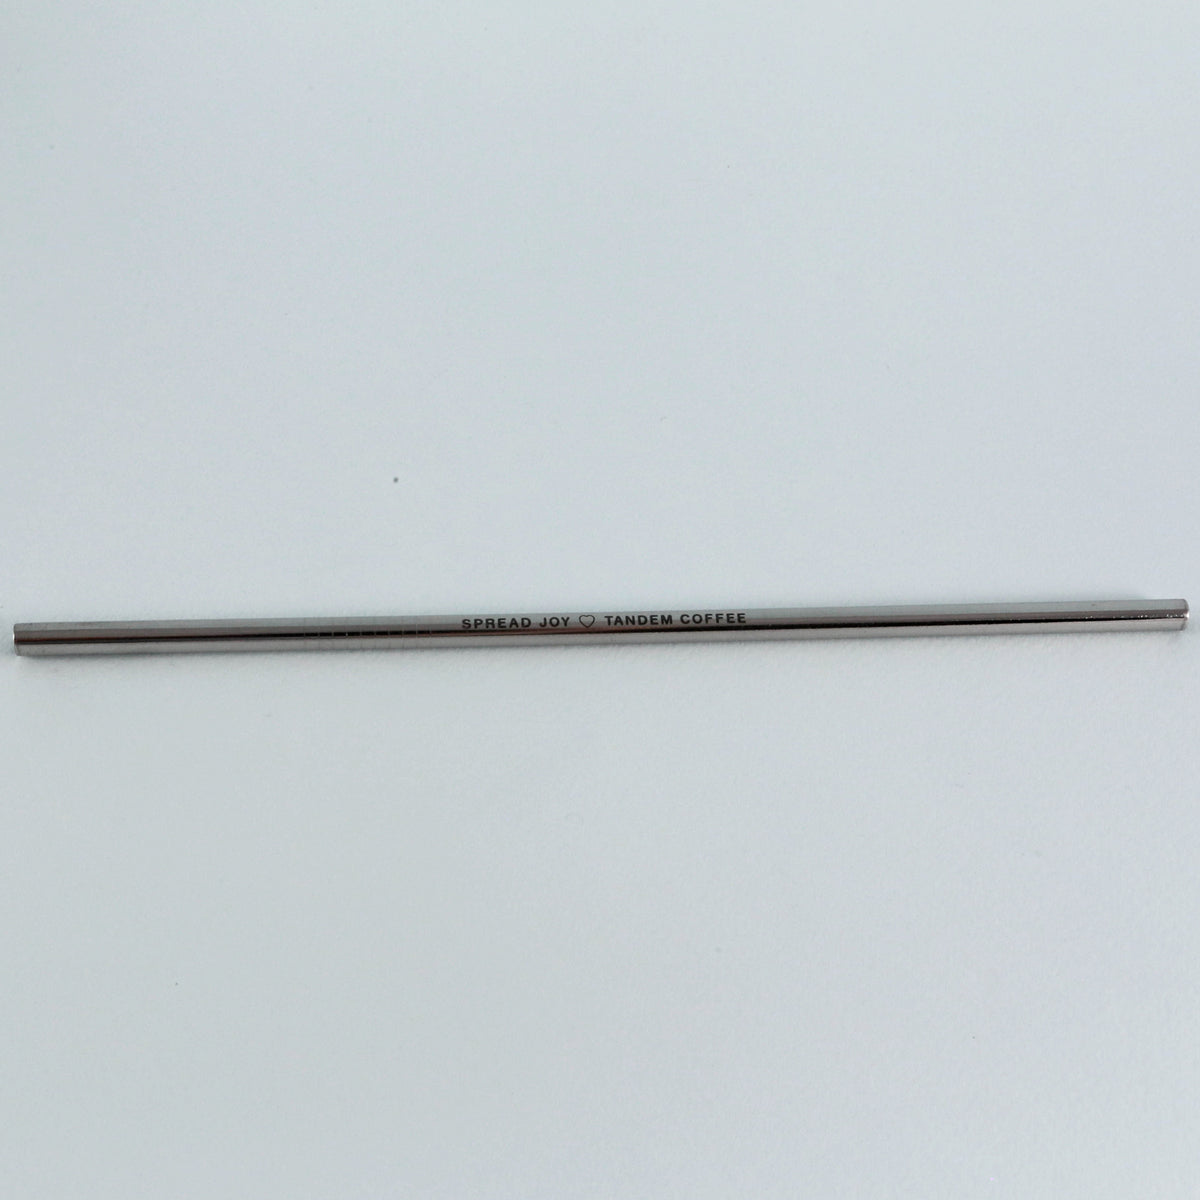 A slender, gray pencil with the inscription "Tandem Coffee Roasters Tandem Straw" centered along its side, set against a plain white background.